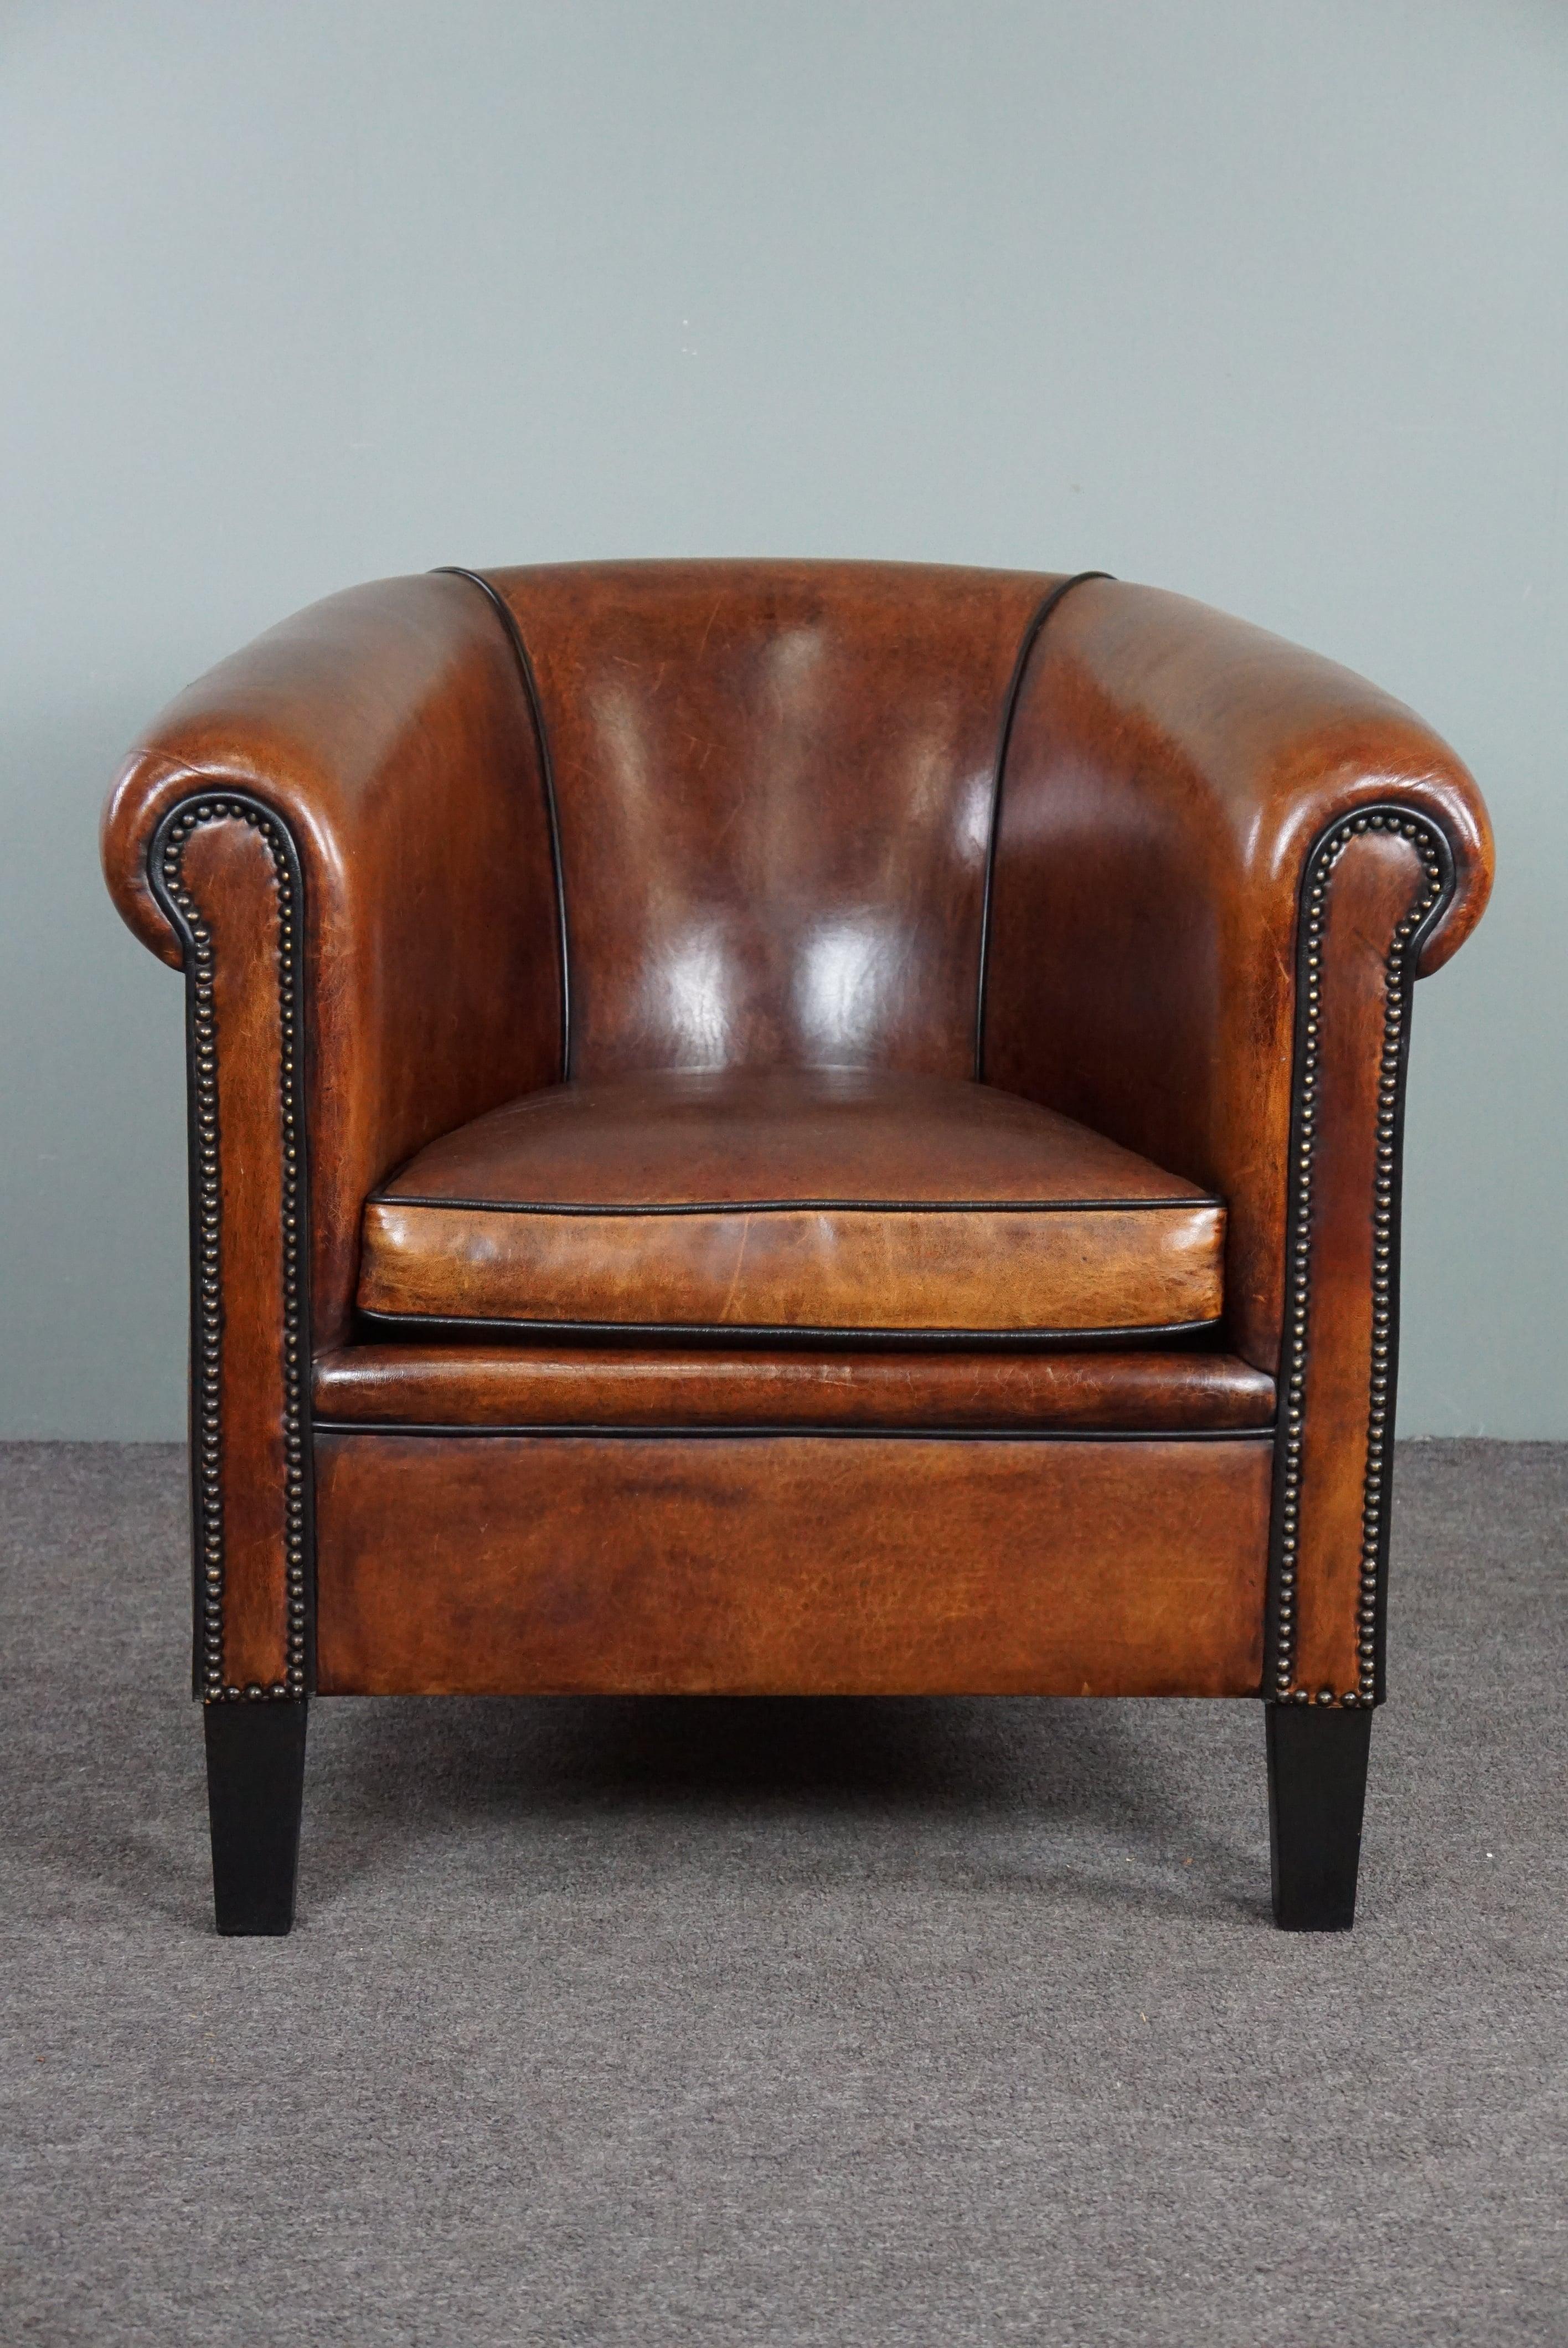 Offered is this very beautiful sheep leather club chair made with only top materials.

This custom-made sheep leather club chair is elegant because of the black piping in combination with the decorative nails and the amazing color. The depth of this